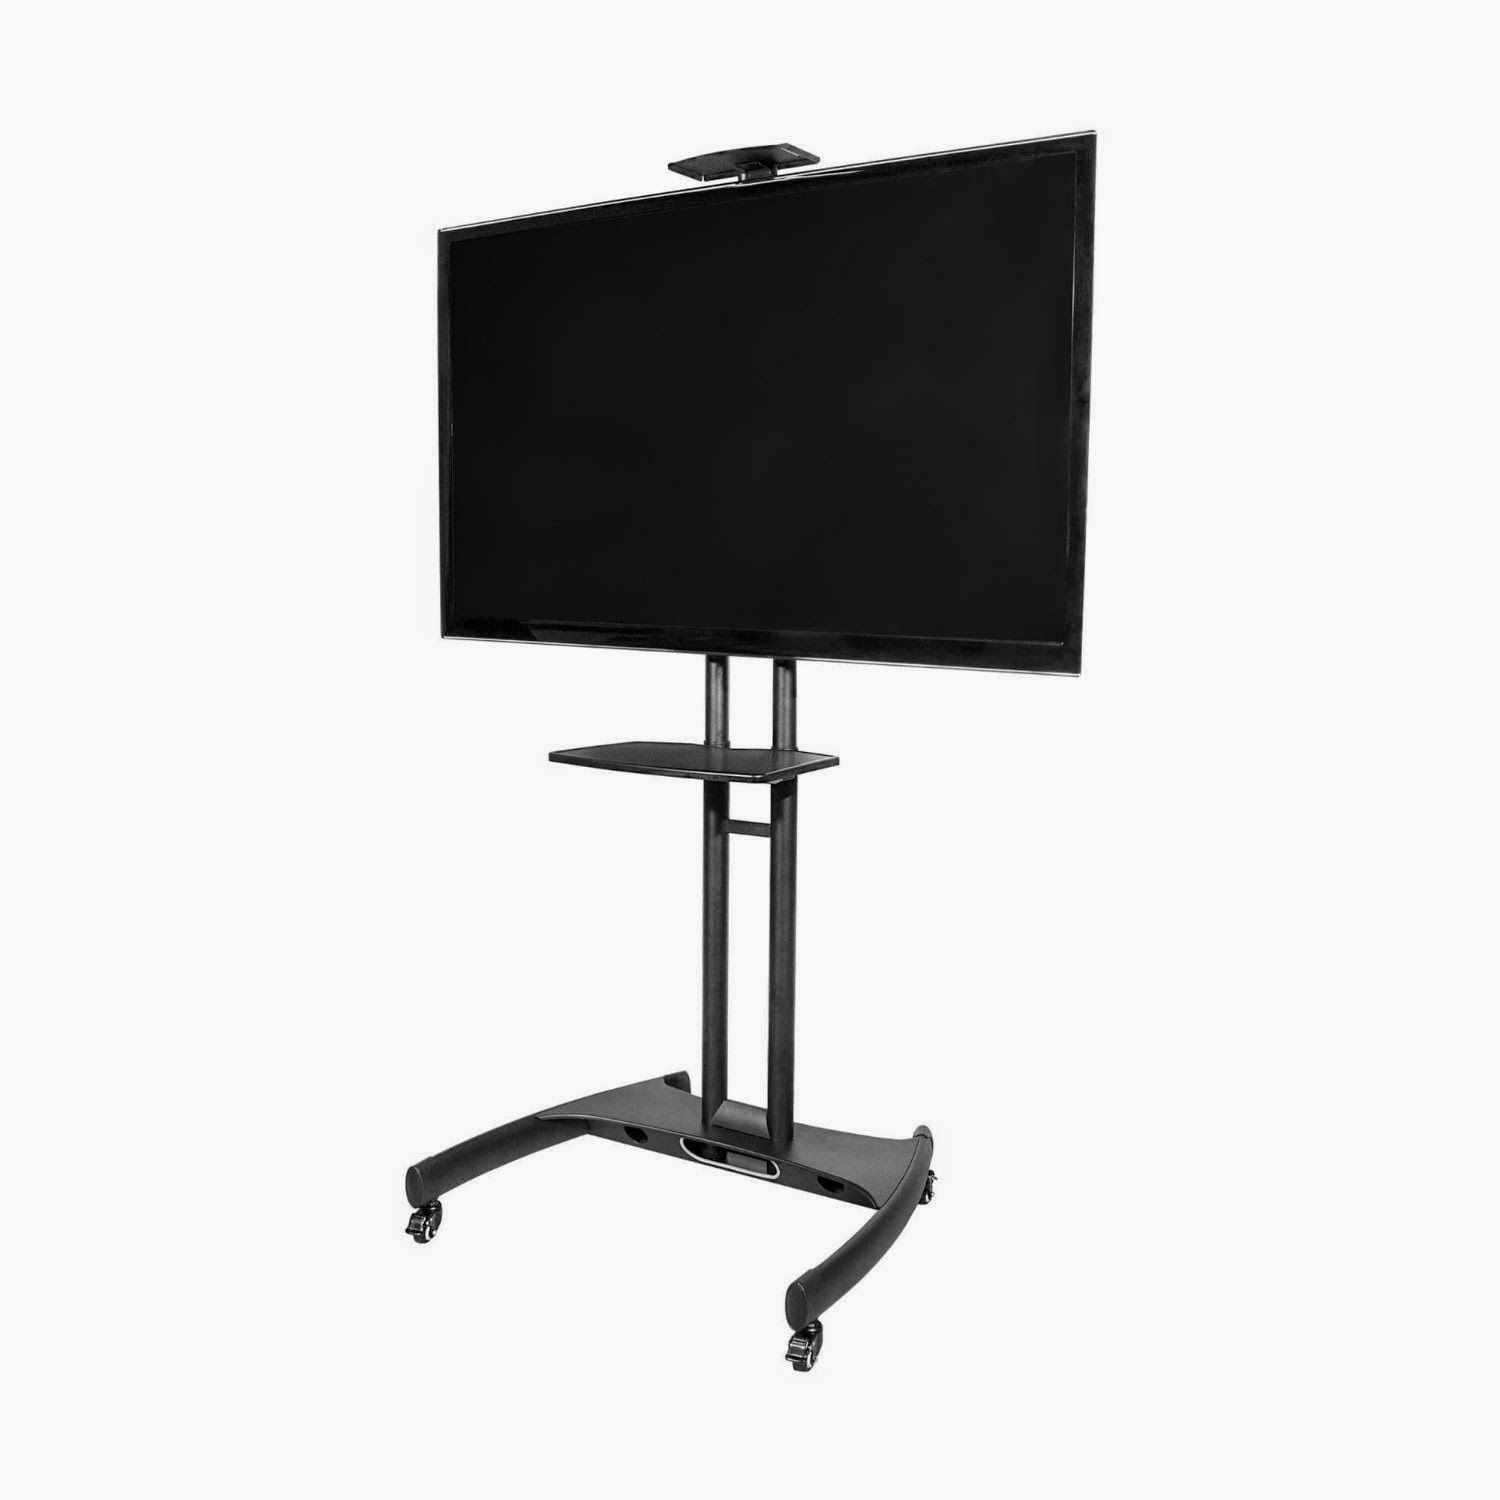 Kanto Mtm65pl Mobile Tv Stand For 37 65 Inch Flat Panel Pertaining To 65 Inch Tv Stands With Integrated Mount (View 13 of 15)